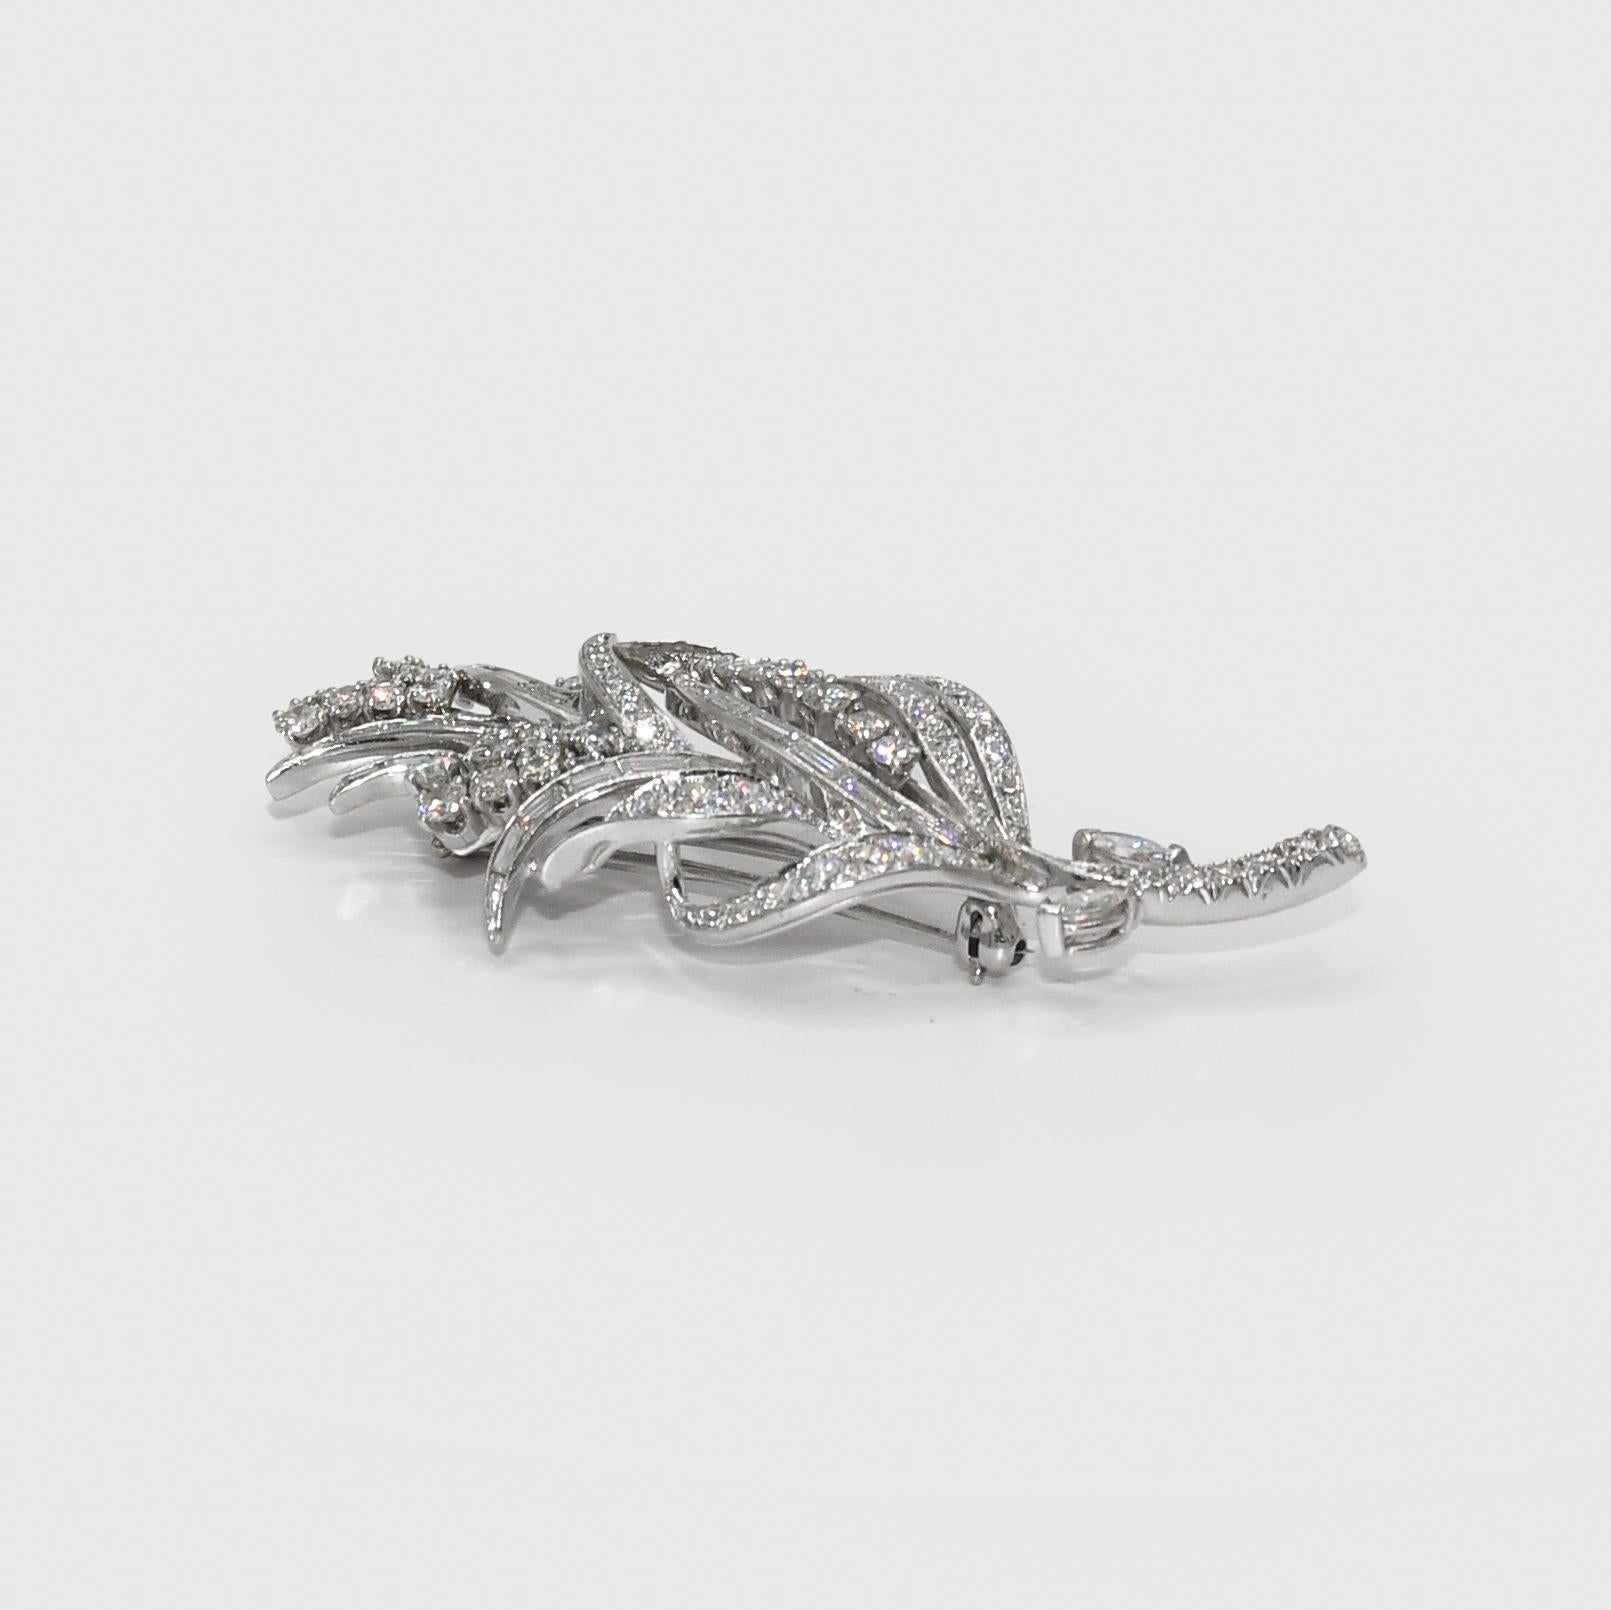 Vintage Platinum Diamond Brooch 2.00tdw, 15g
Ladies vintage platinum and diamond brooch.
Tests platinum with electronic tester and weighs 15.1 grams.
Attractive floral design.
The diamonds are round brilliants and baguette cuts, 2.00 total carats, G